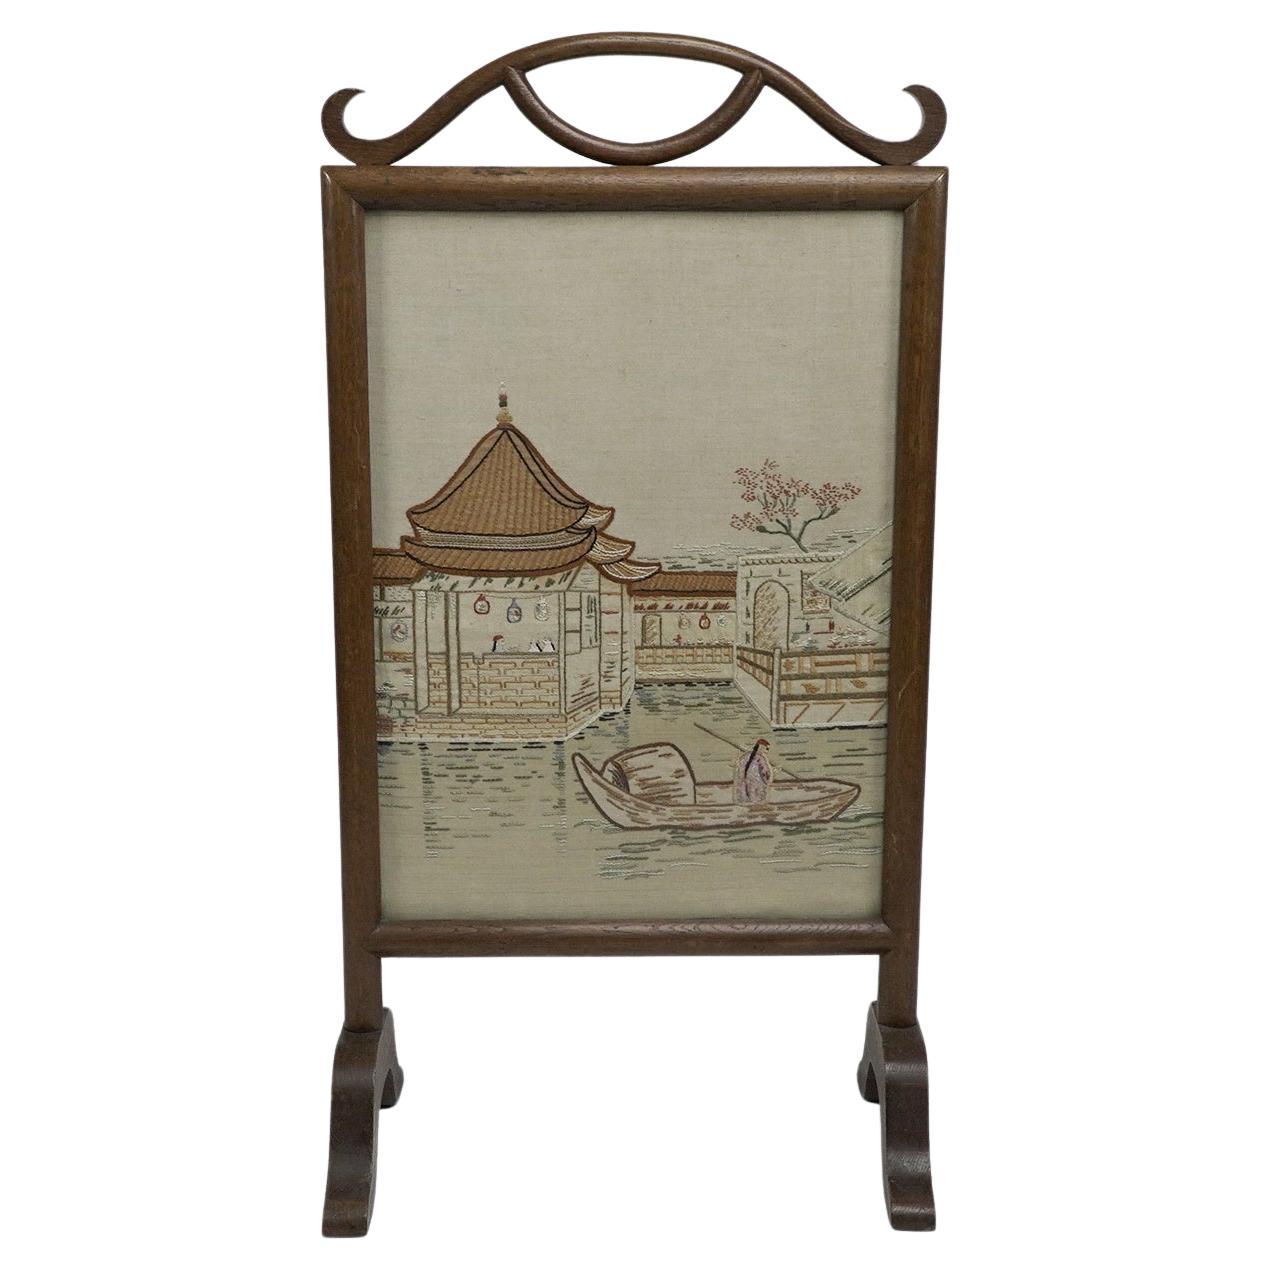 Anglo-Japanese oak firescreen with a Torri gate detail & embroidery river scene.